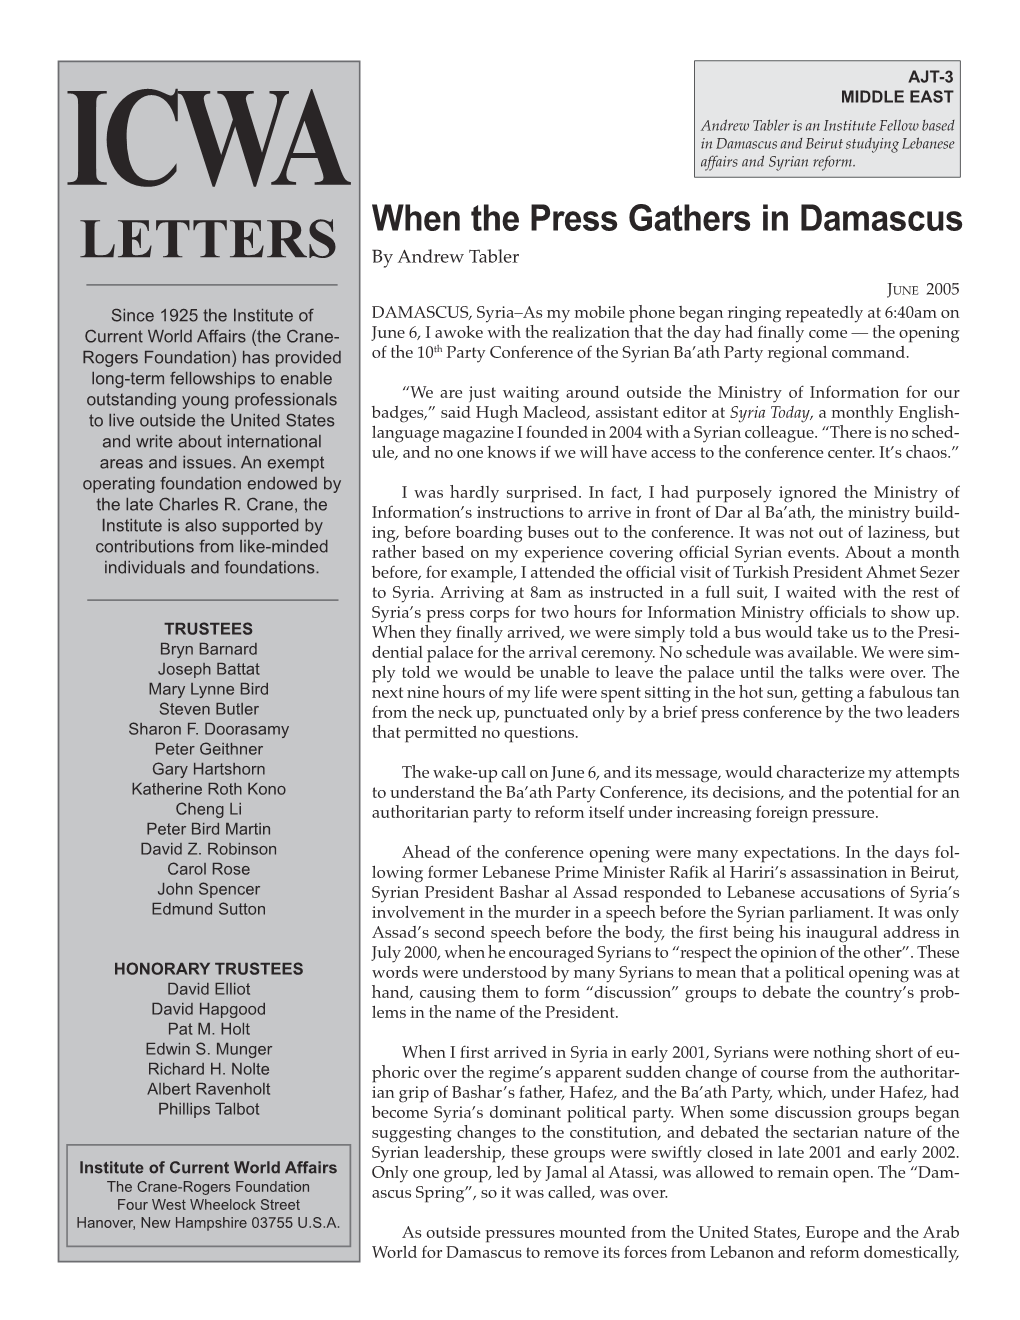 When the Press Gathers in Damascus LETTERS by Andrew Tabler